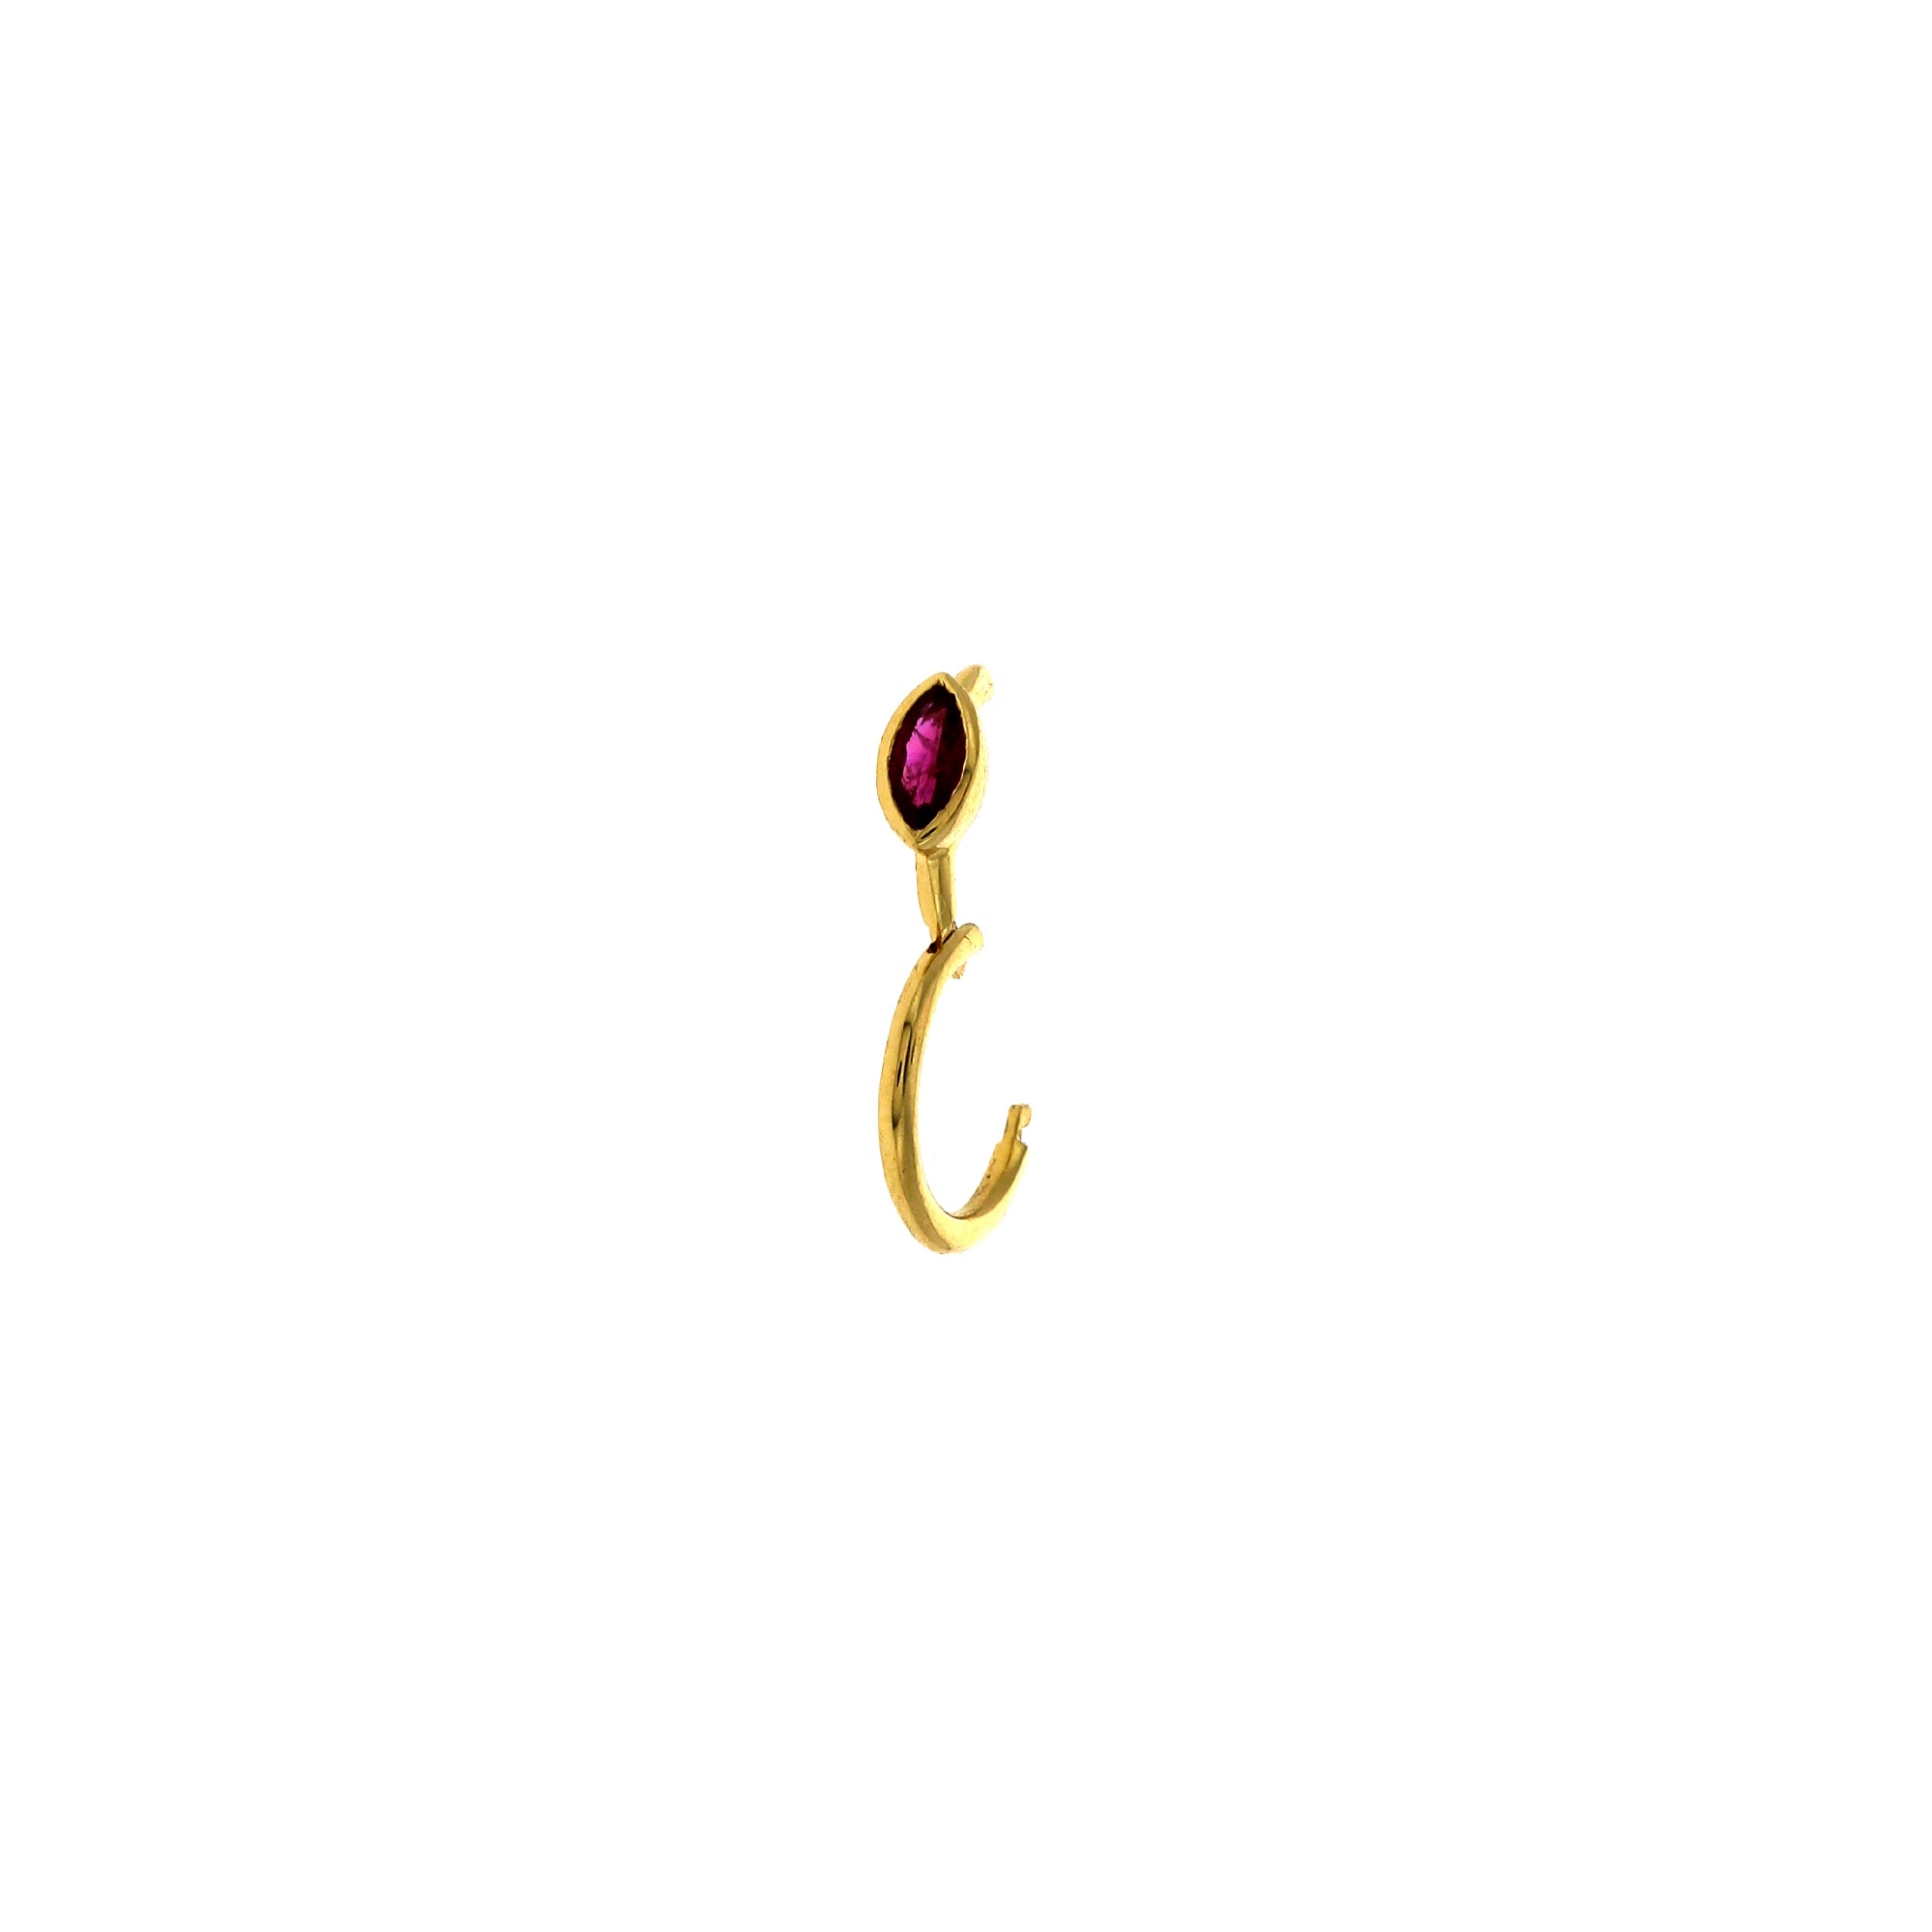 Créole 6.5mm Rubis Marquise 3x2mm Or Jaune